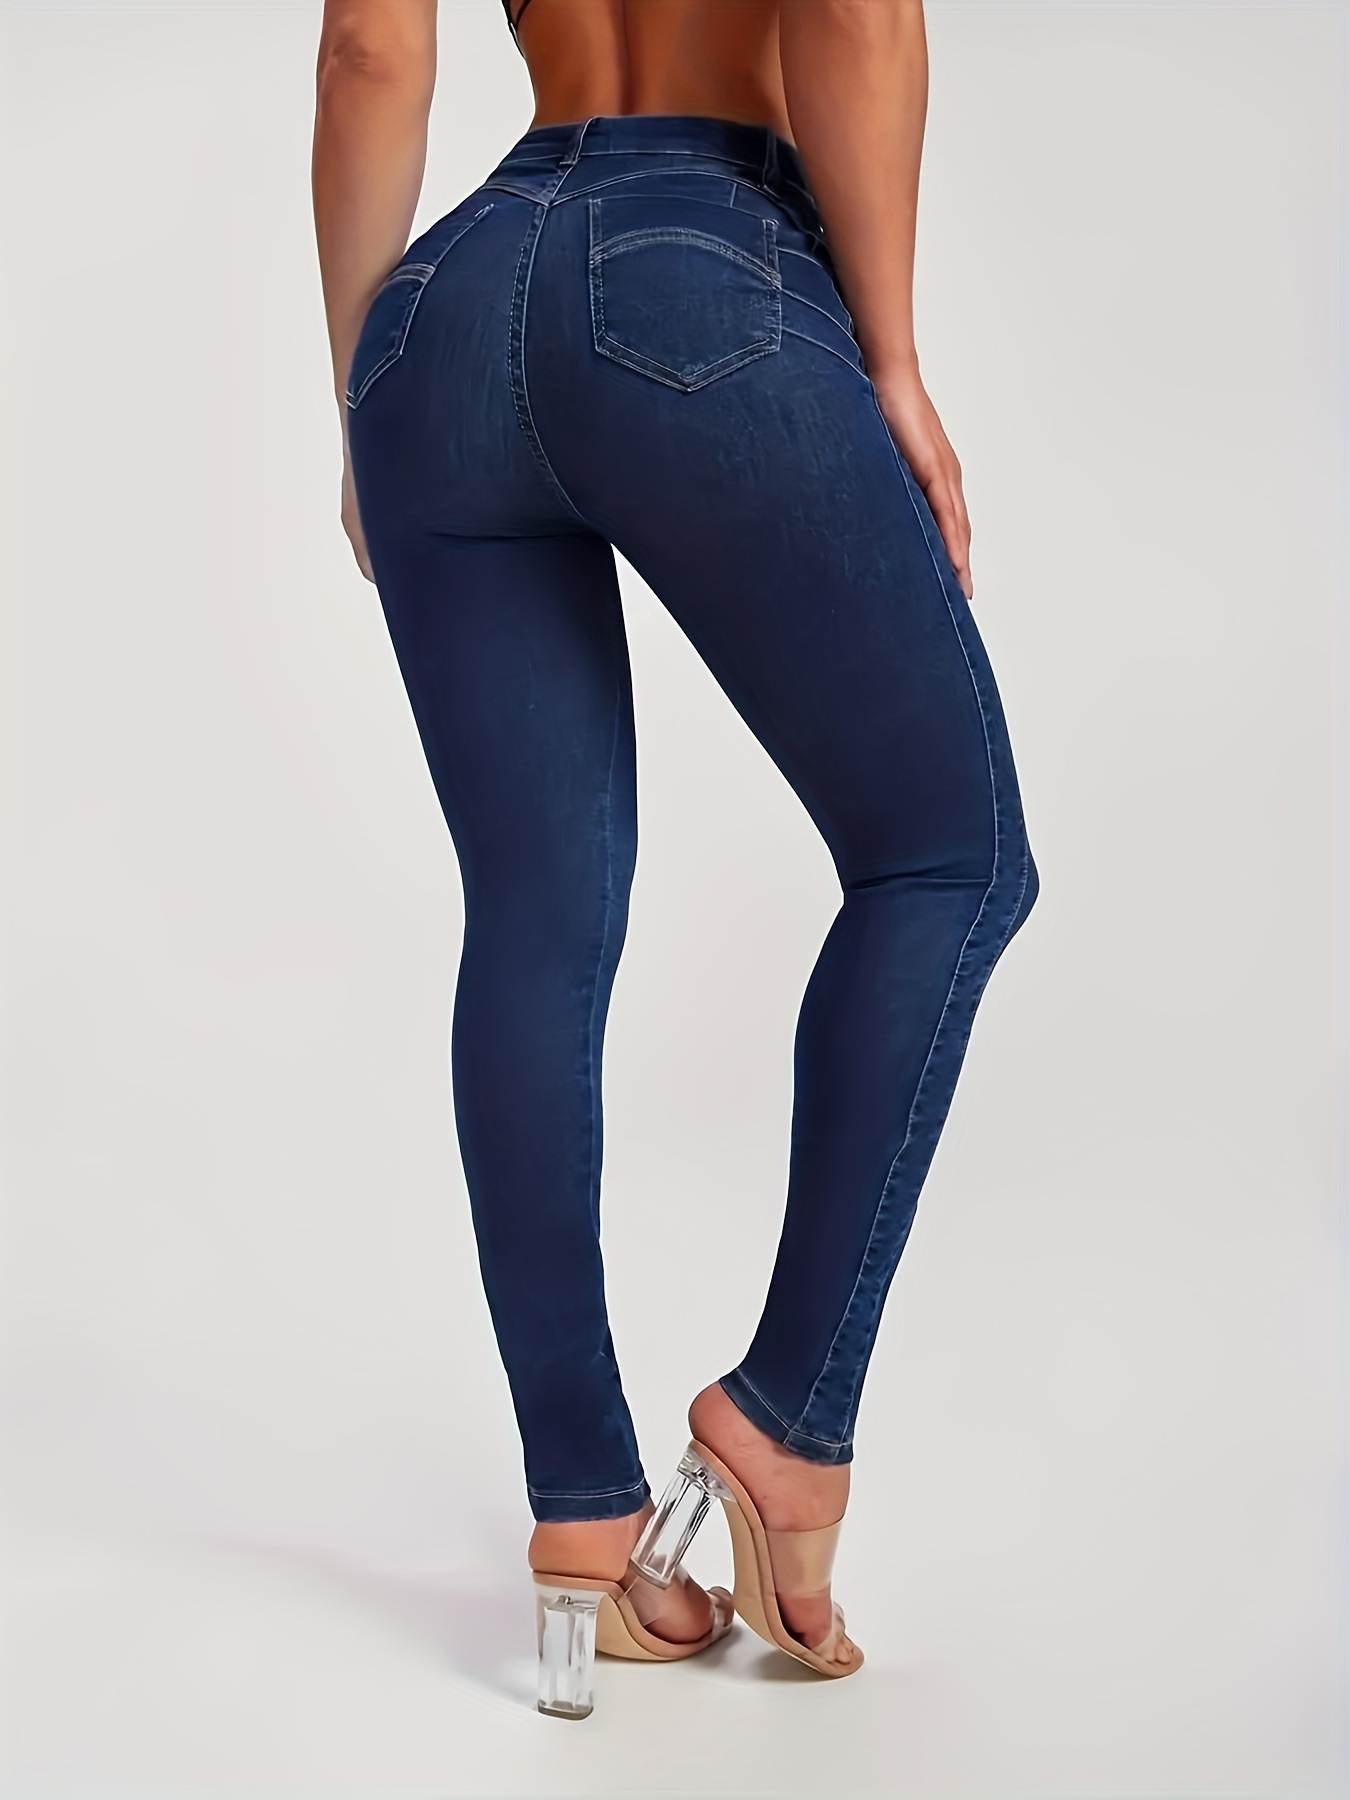 Flamingals Women's Butt Lifting Jeans for Women Trendy Tummy Control Jeans  Stretch Denim Pants Artesia S at  Women's Jeans store